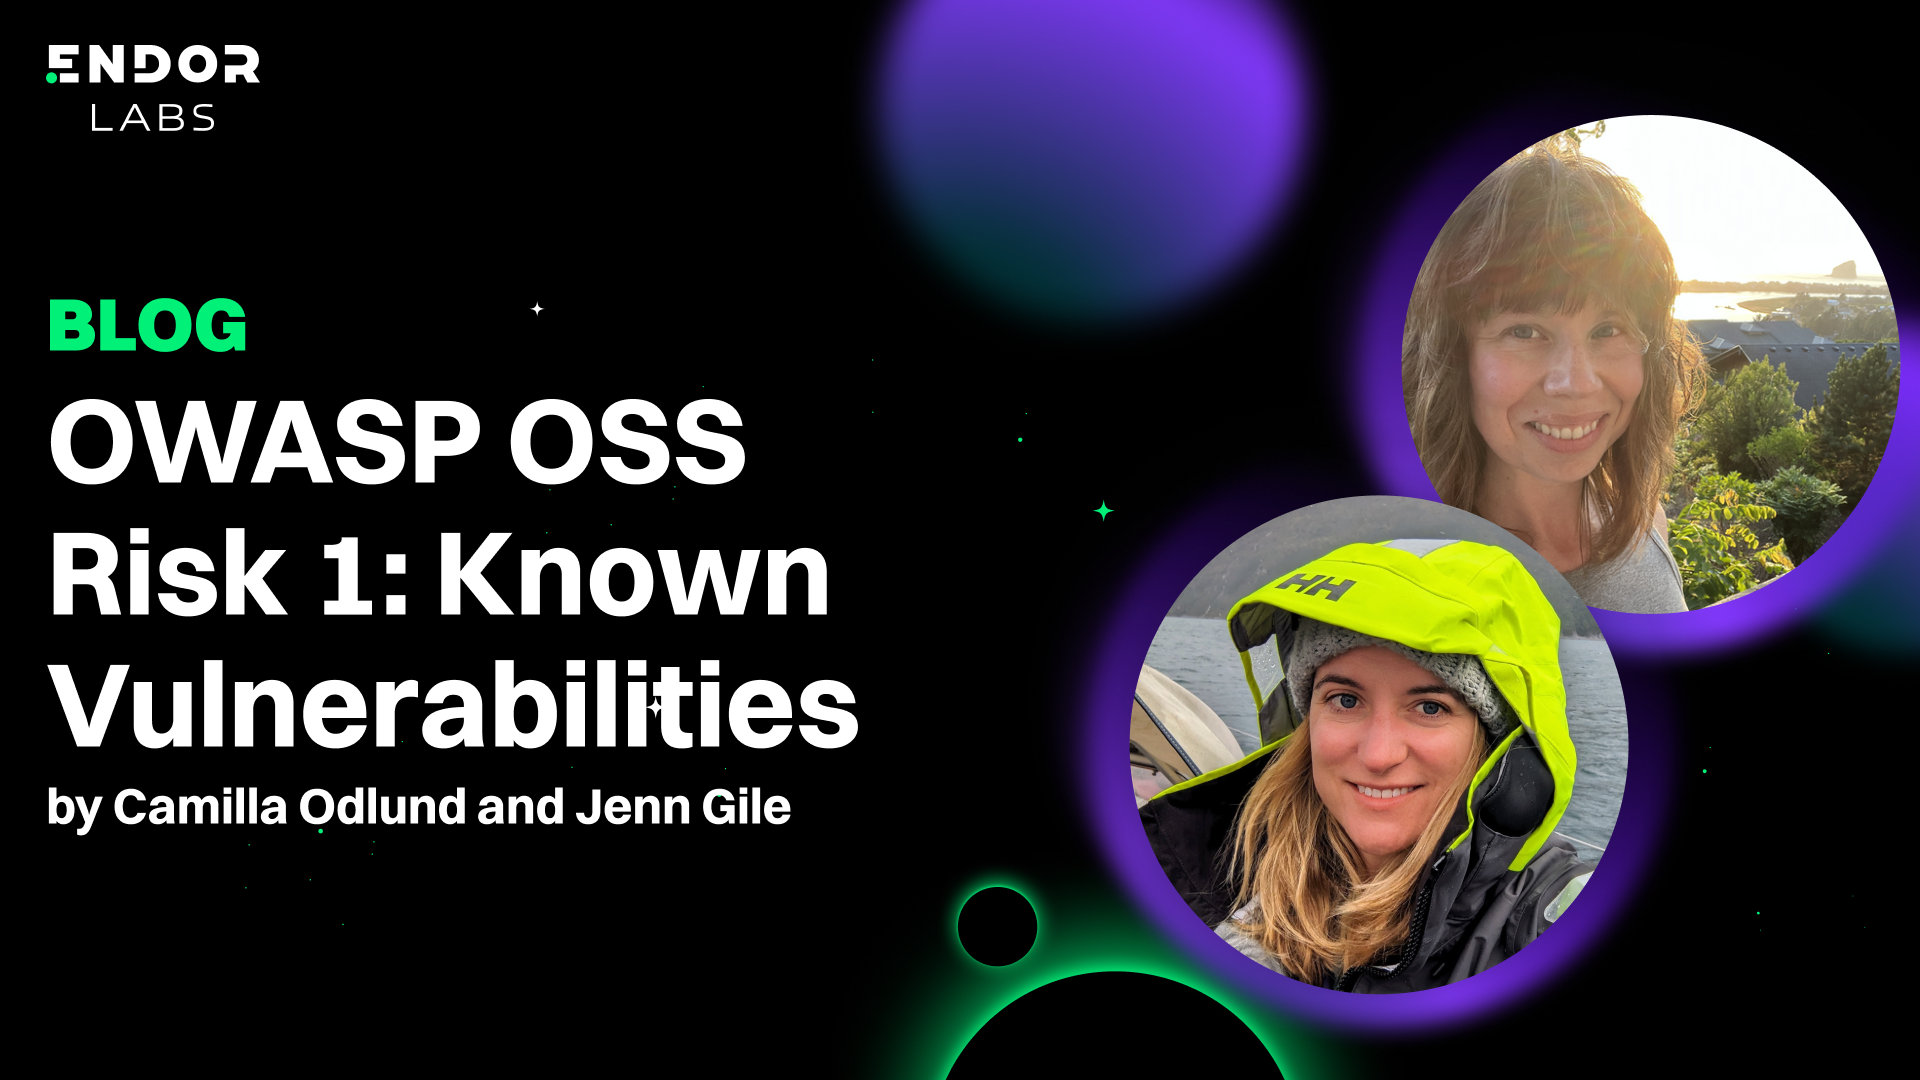  OWASP OSS Risk 1: Known Vulnerabilities, by Camila Odlund and Jenn Gile